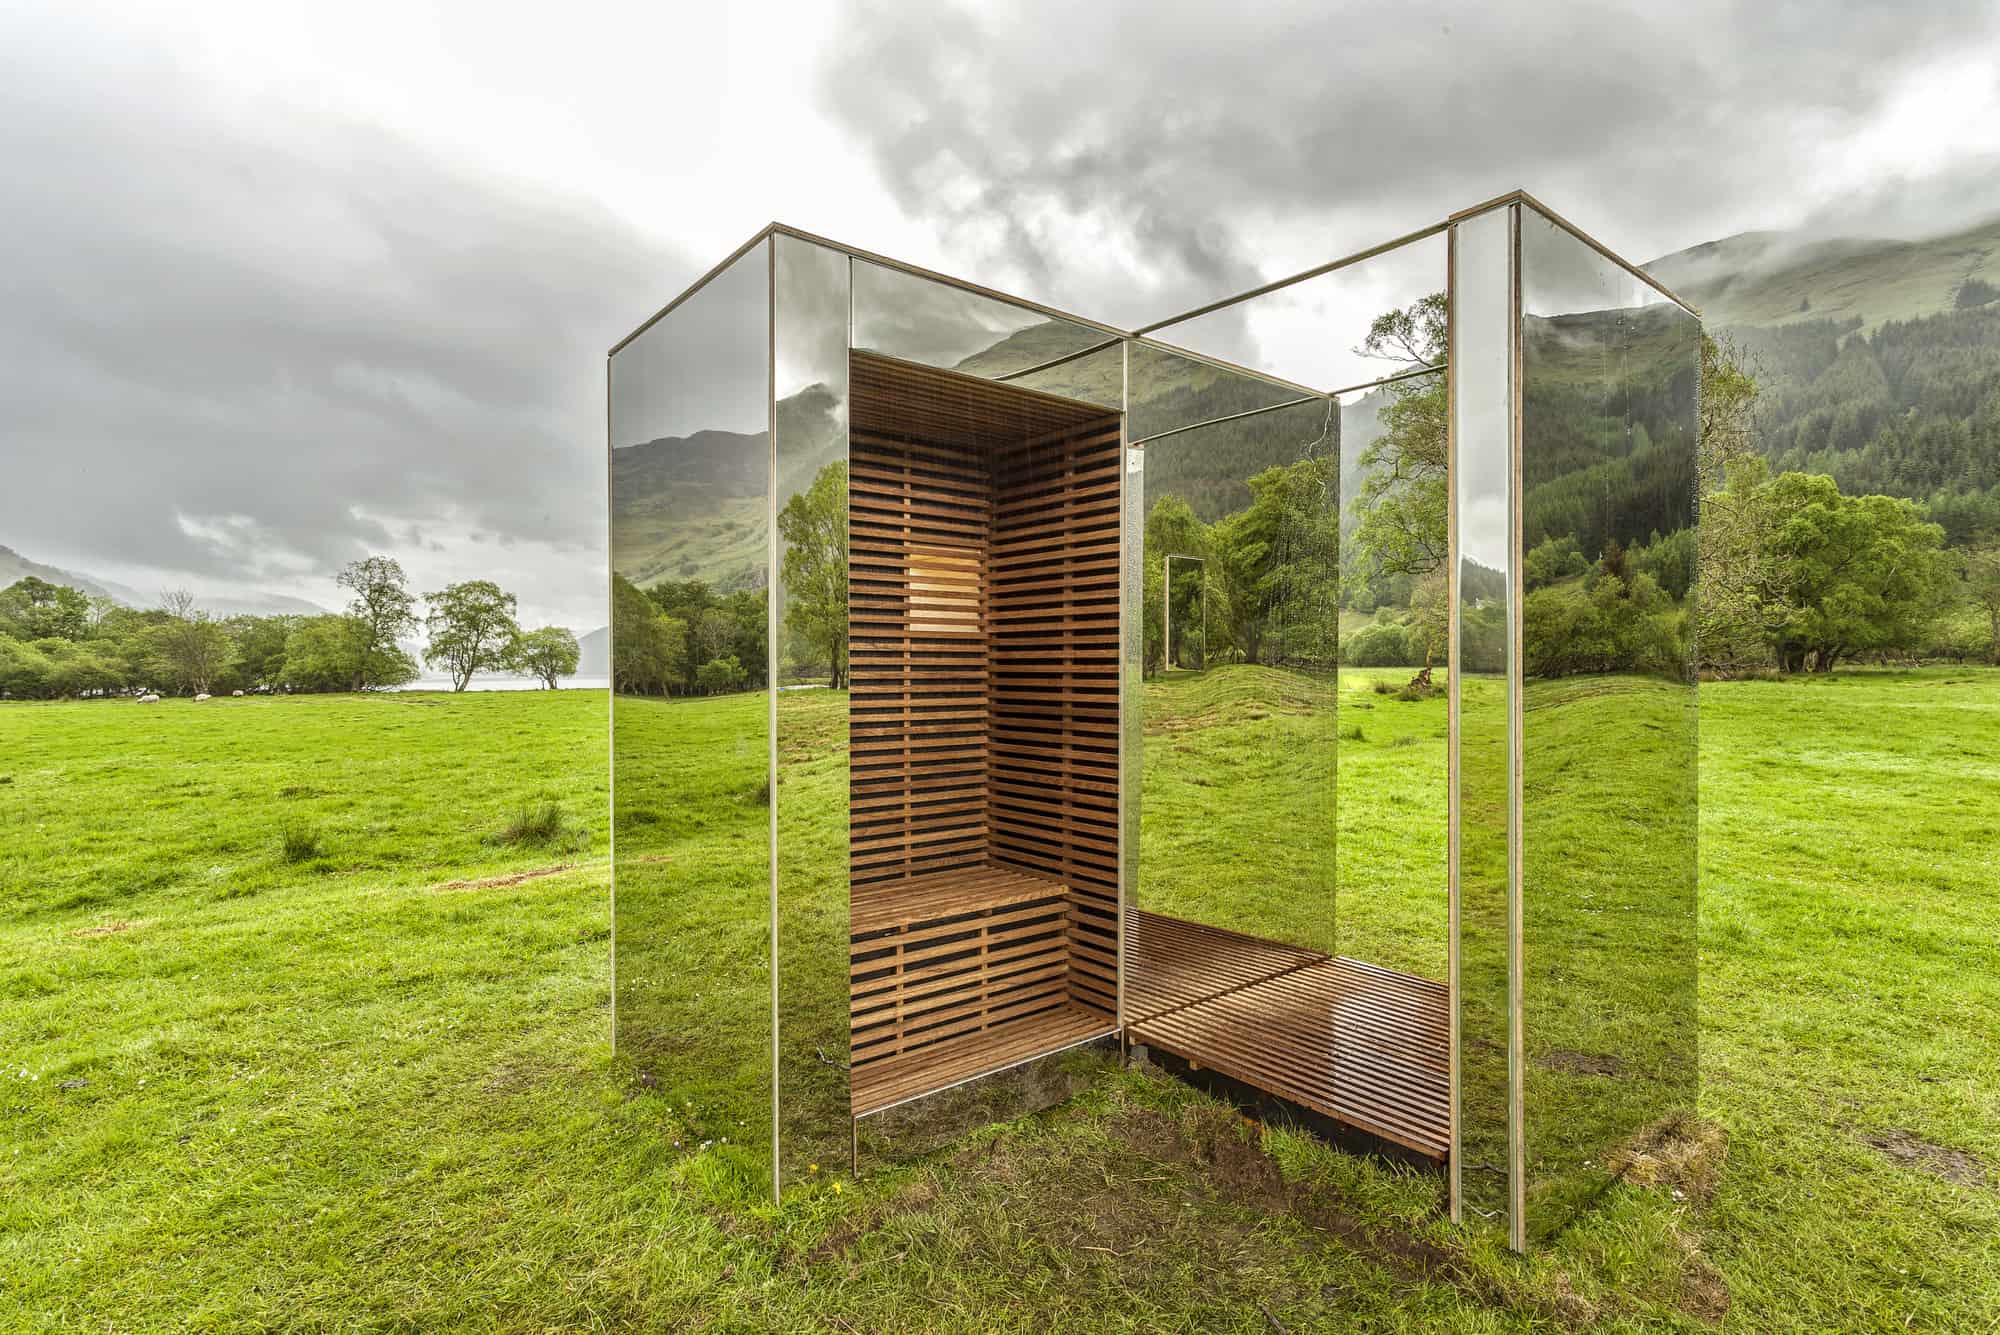 Mirrored Cabin Reflects Landscape as it Materializes In and Out of View